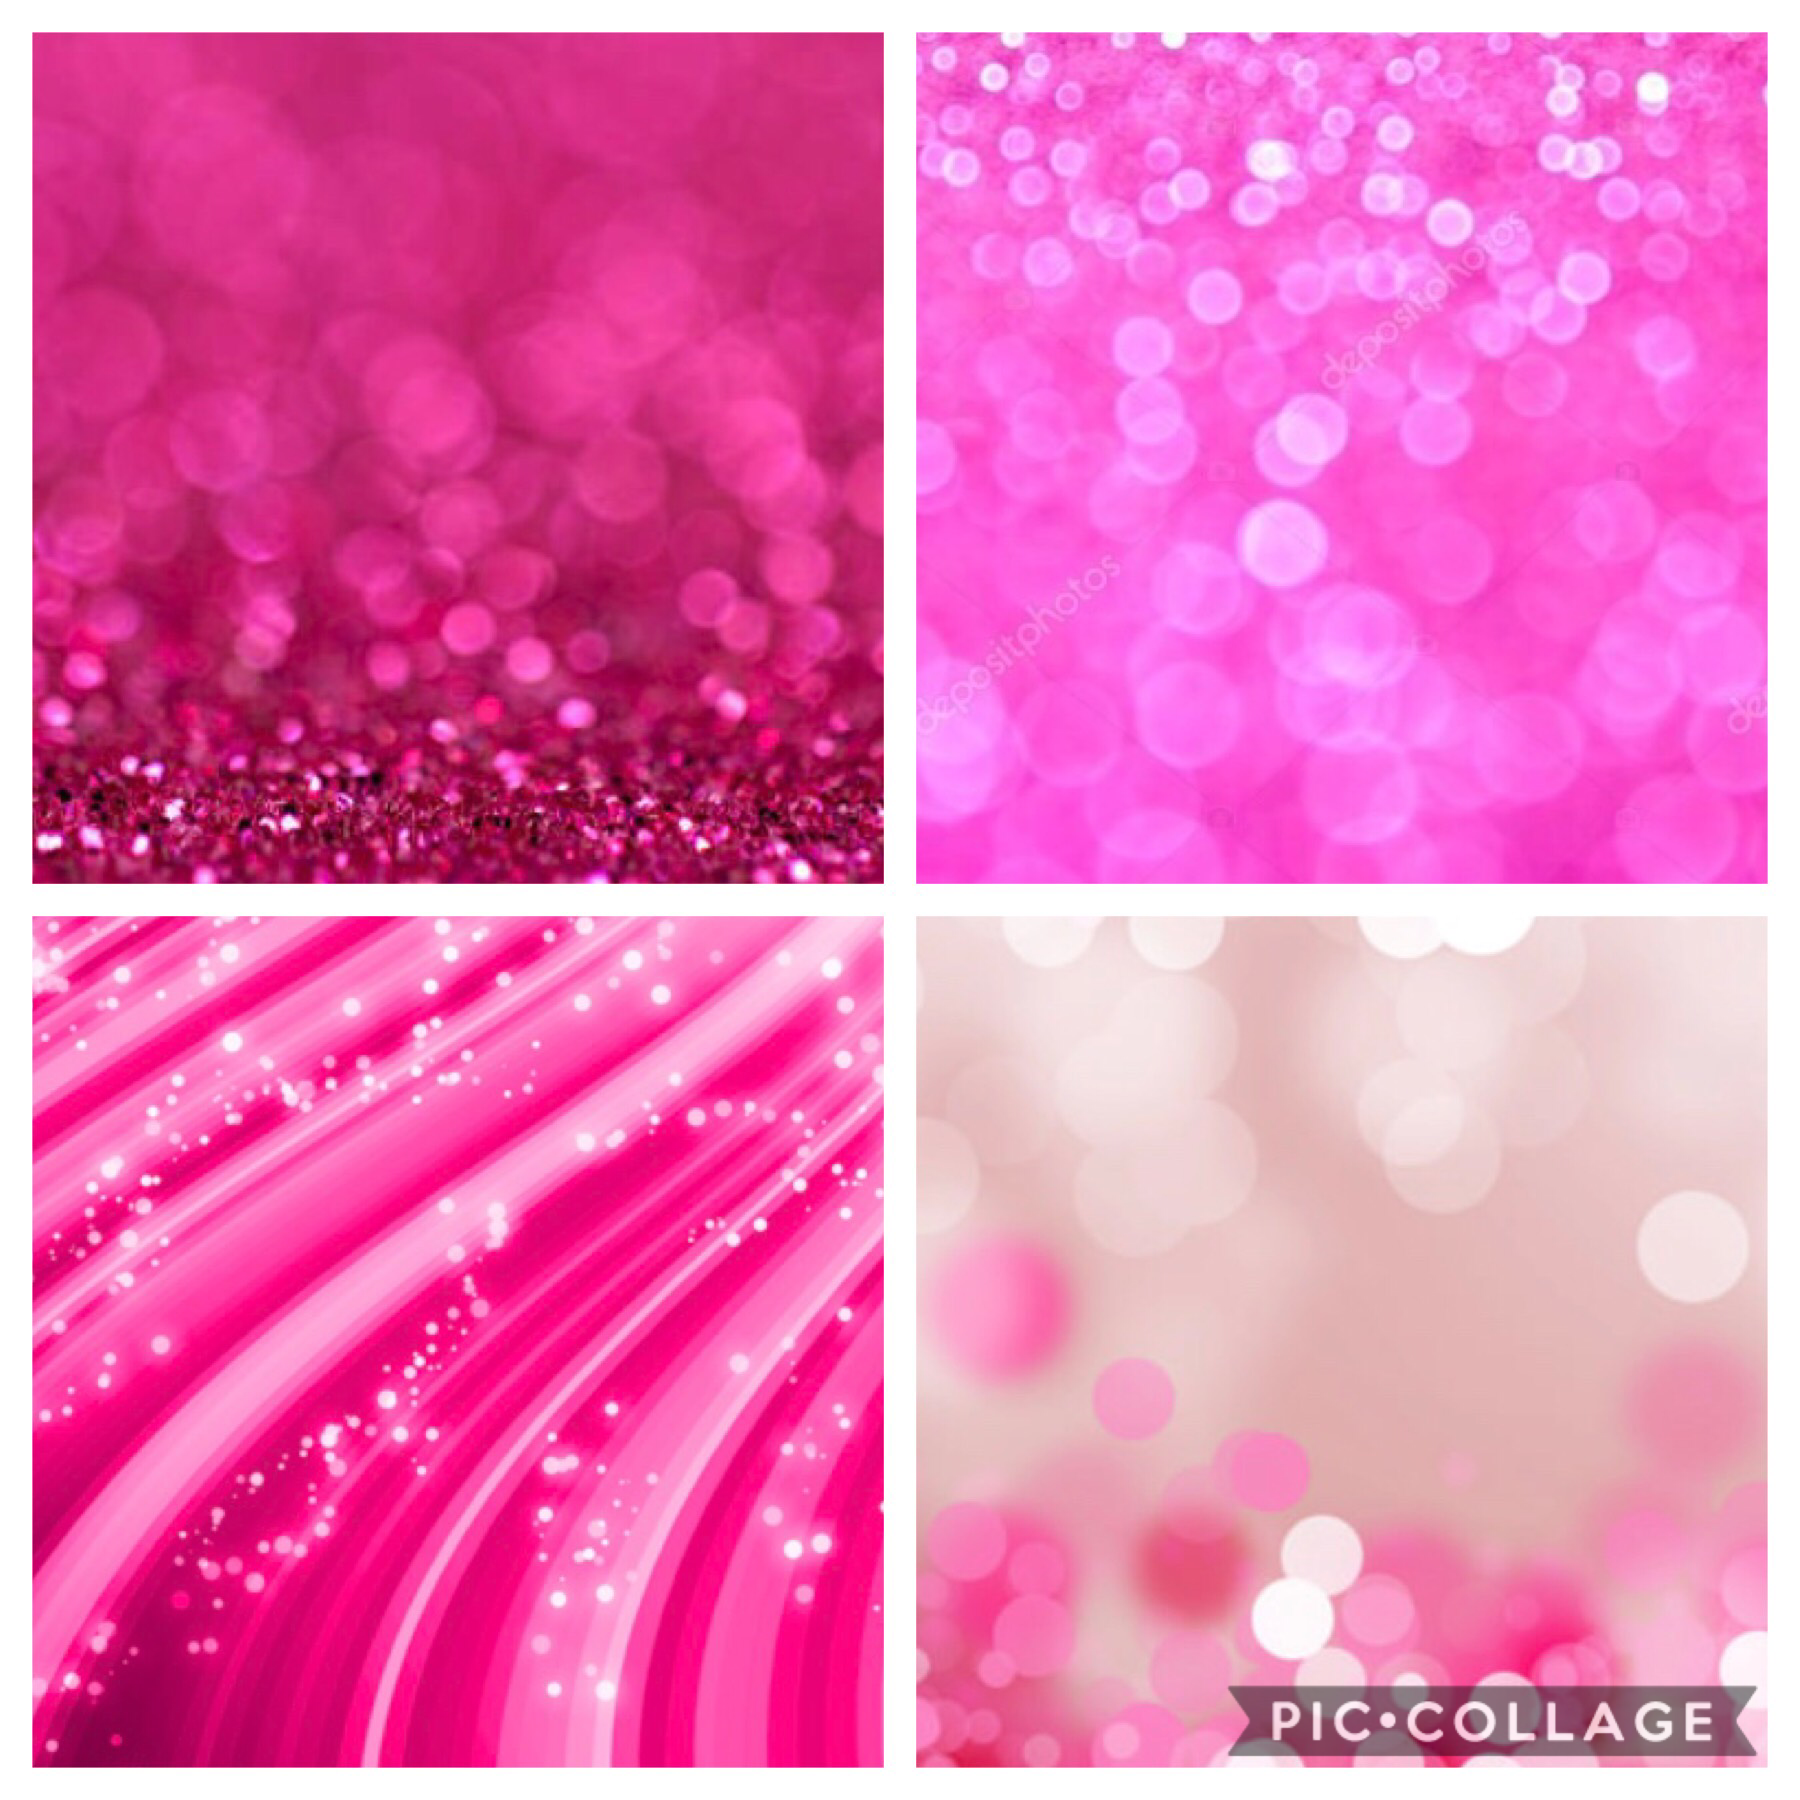 Comment down below your favorite color... mine is pink!